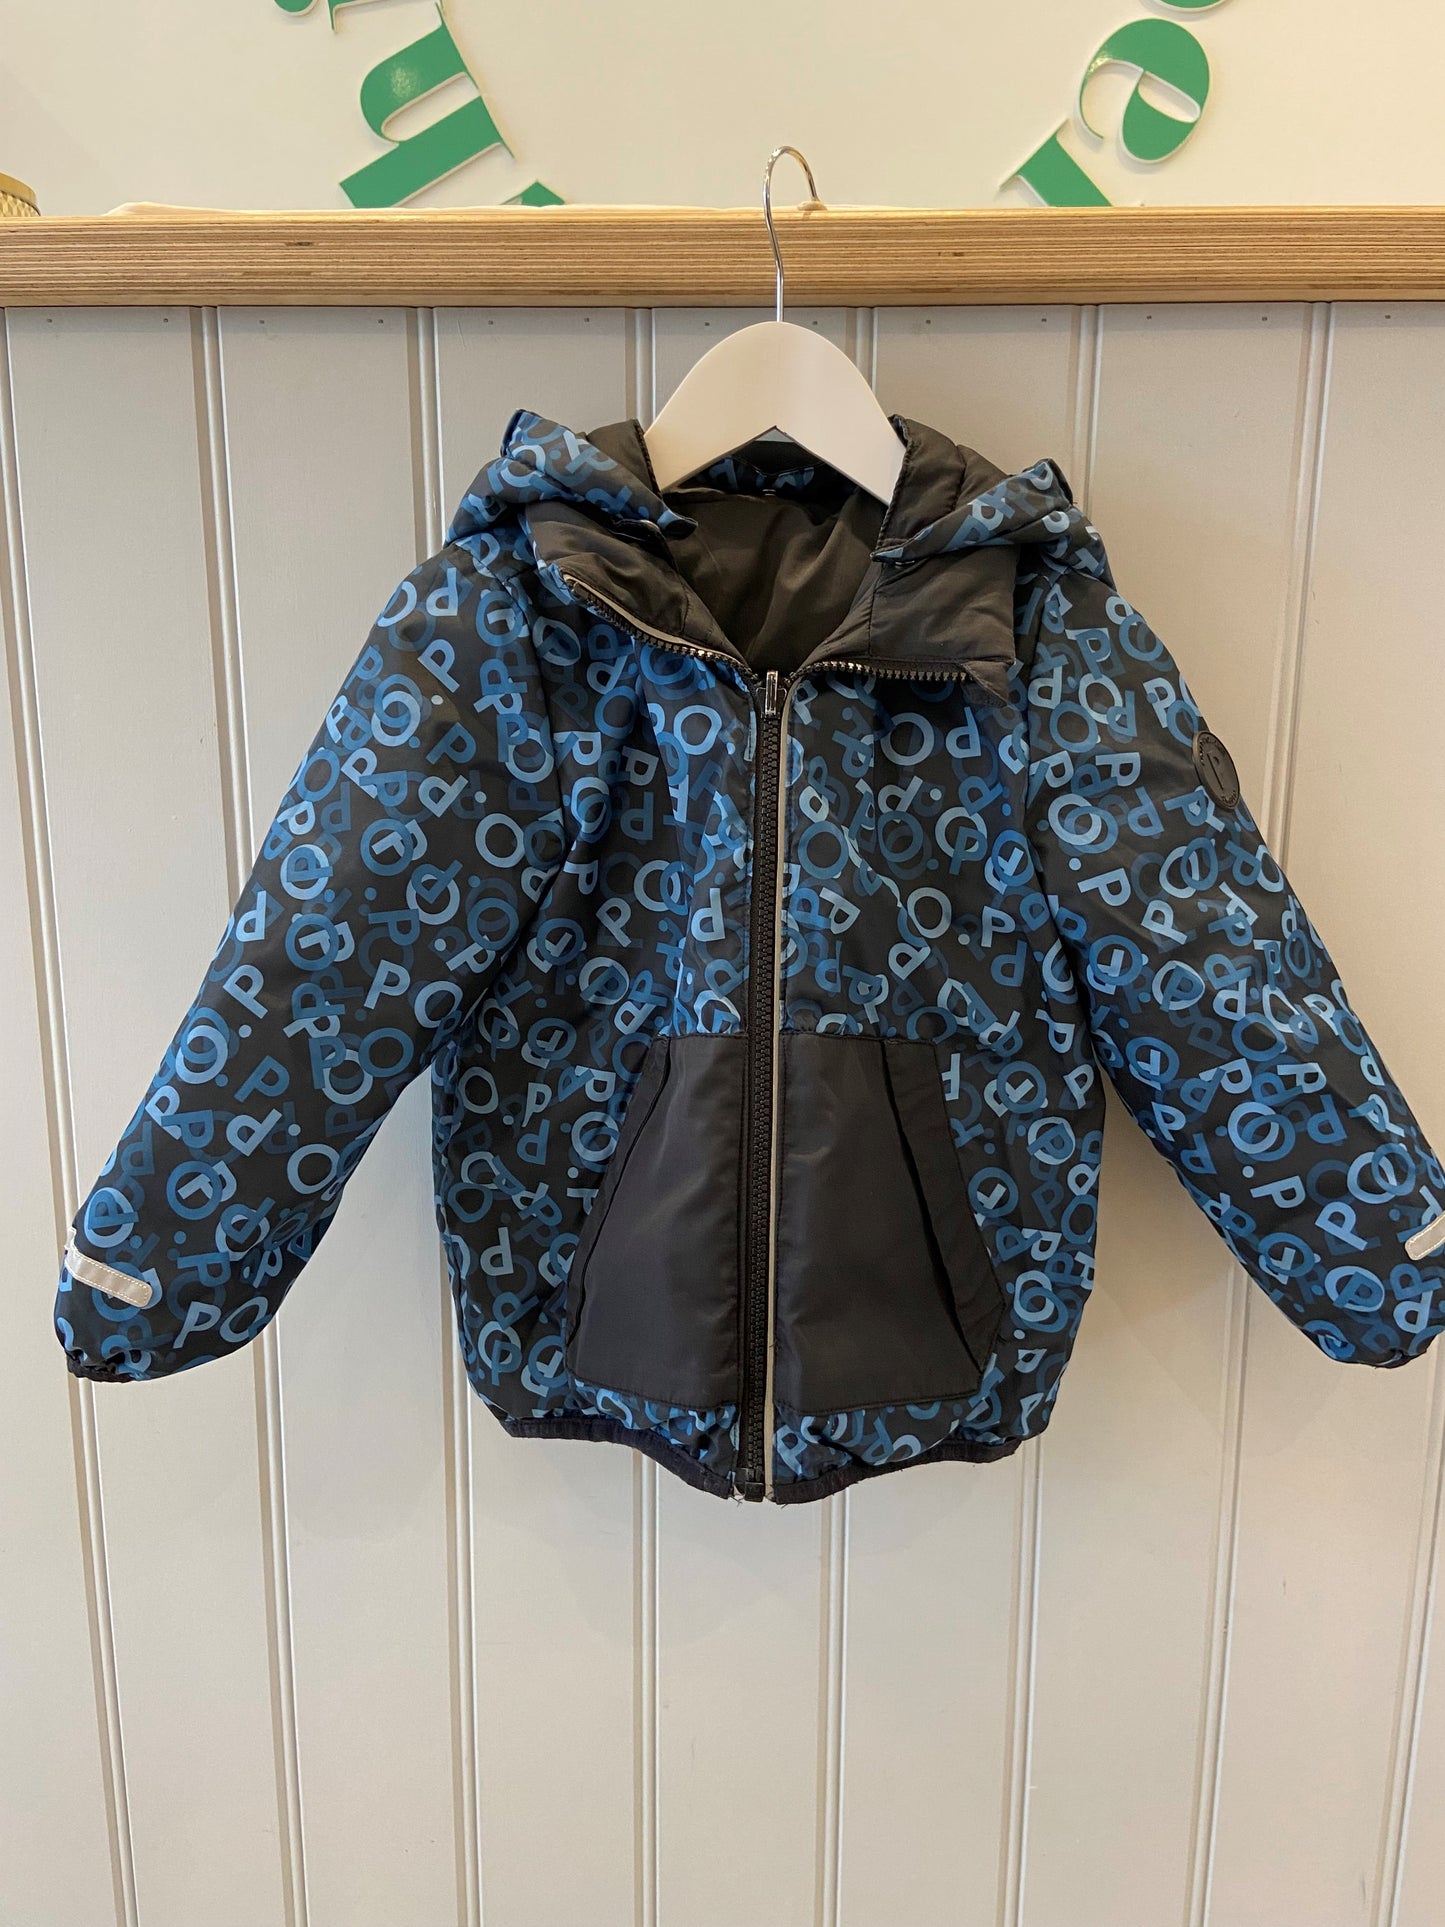 Pre-loved Reversible Puffa Jacket by Polarn O.Pyret